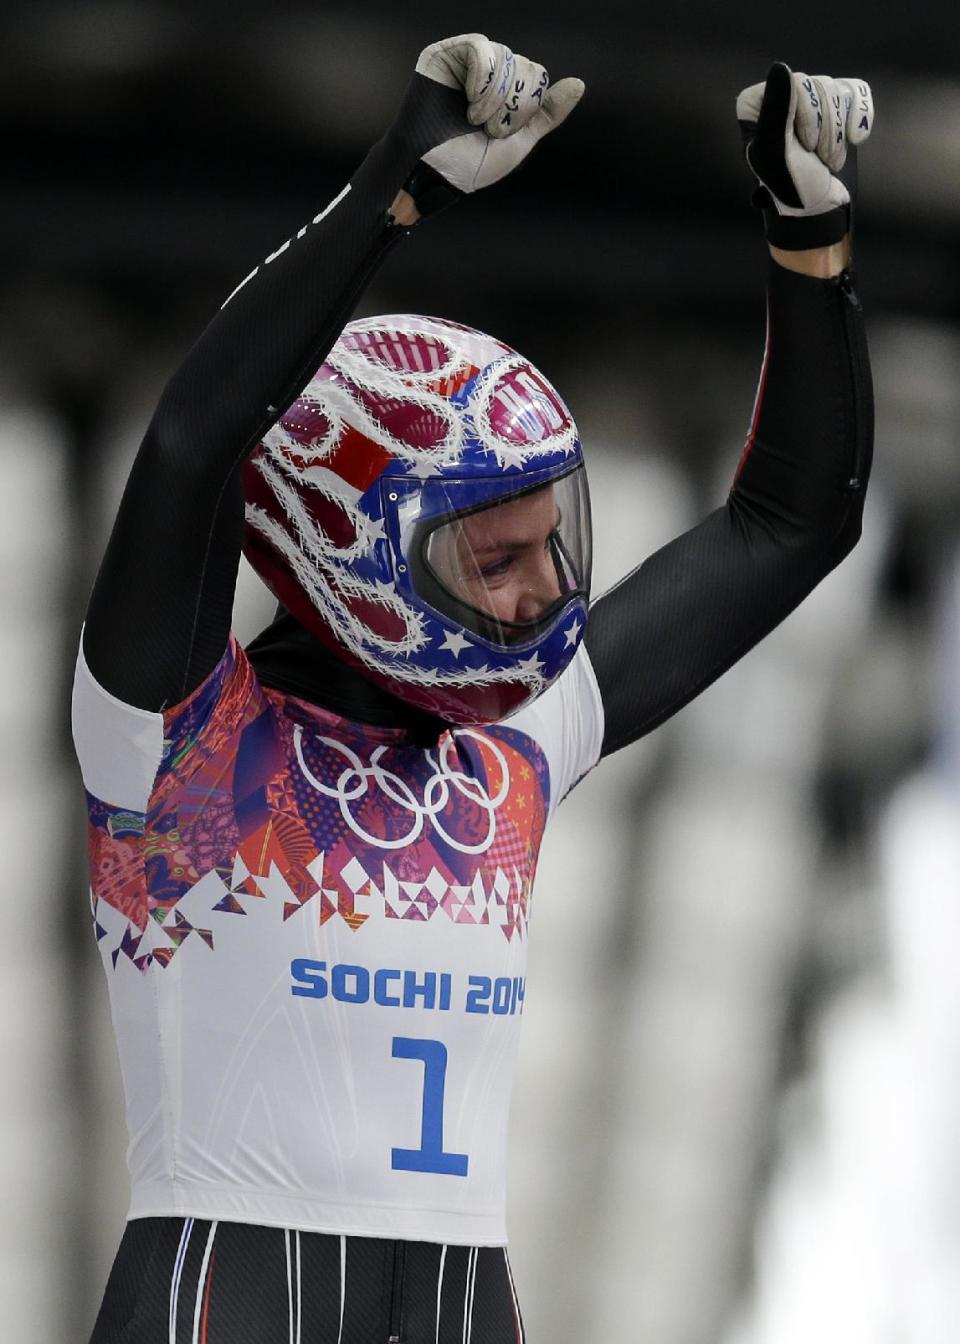 Noelle Pikus-Pace of the United States waves to supporters in the finish area after her first run during the women's skeleton competition at the 2014 Winter Olympics, Thursday, Feb. 13, 2014, in Krasnaya Polyana, Russia. (AP Photo/Natacha Pisarenko)